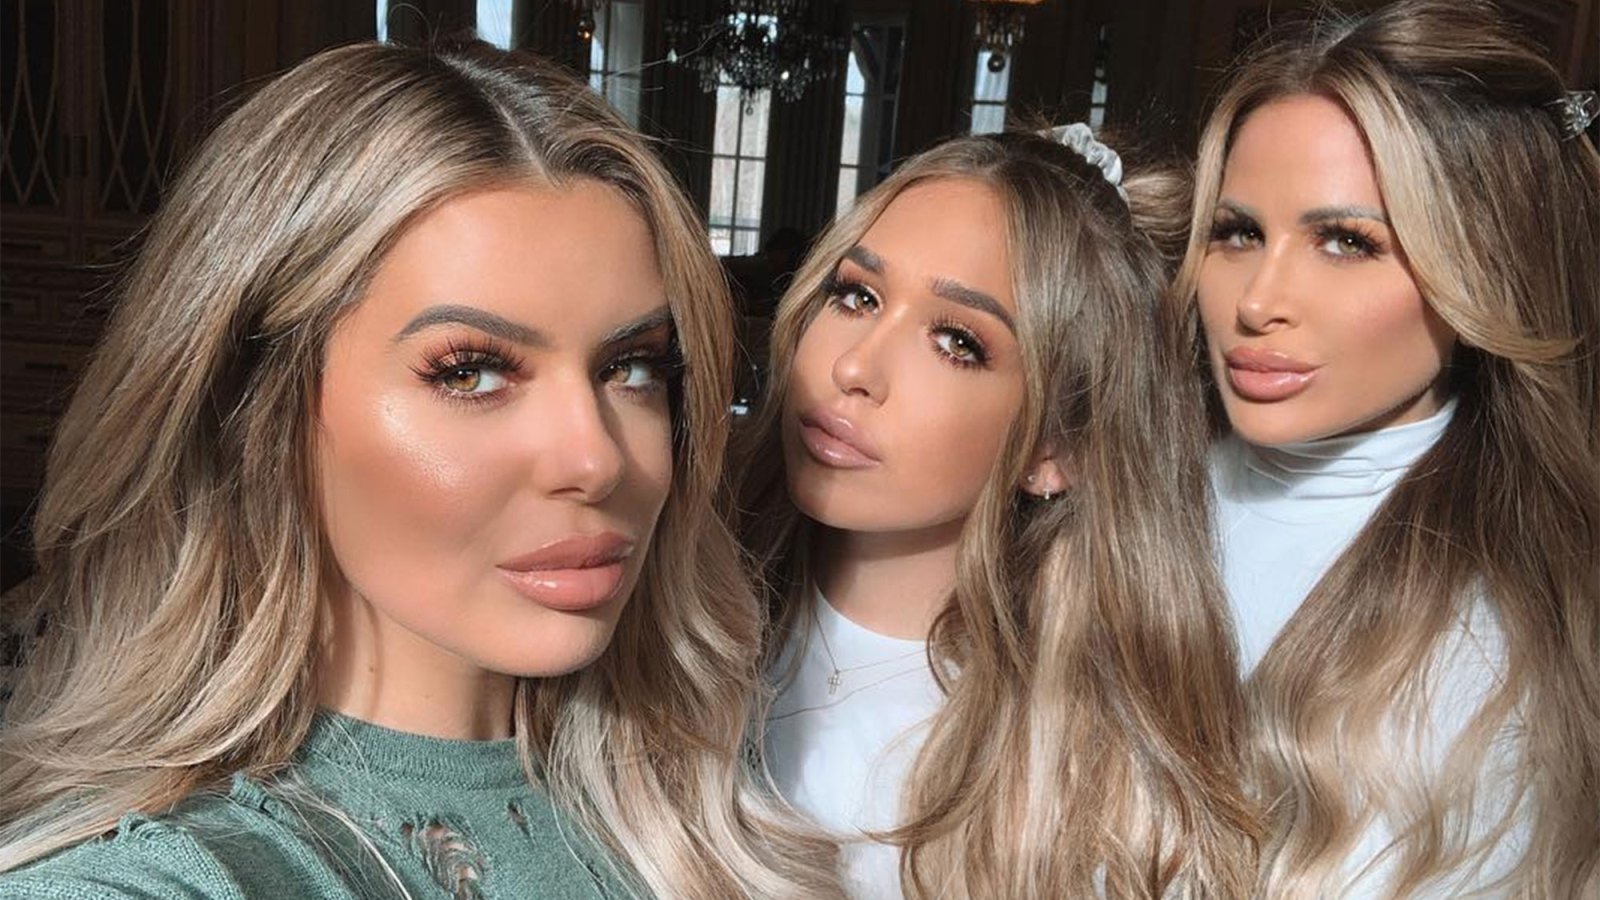 Brielle Biermann Jokes About ‘3 for 1 Special’ at Plastic Surgeon With Mom Kim Zolciak and Sister Ariana